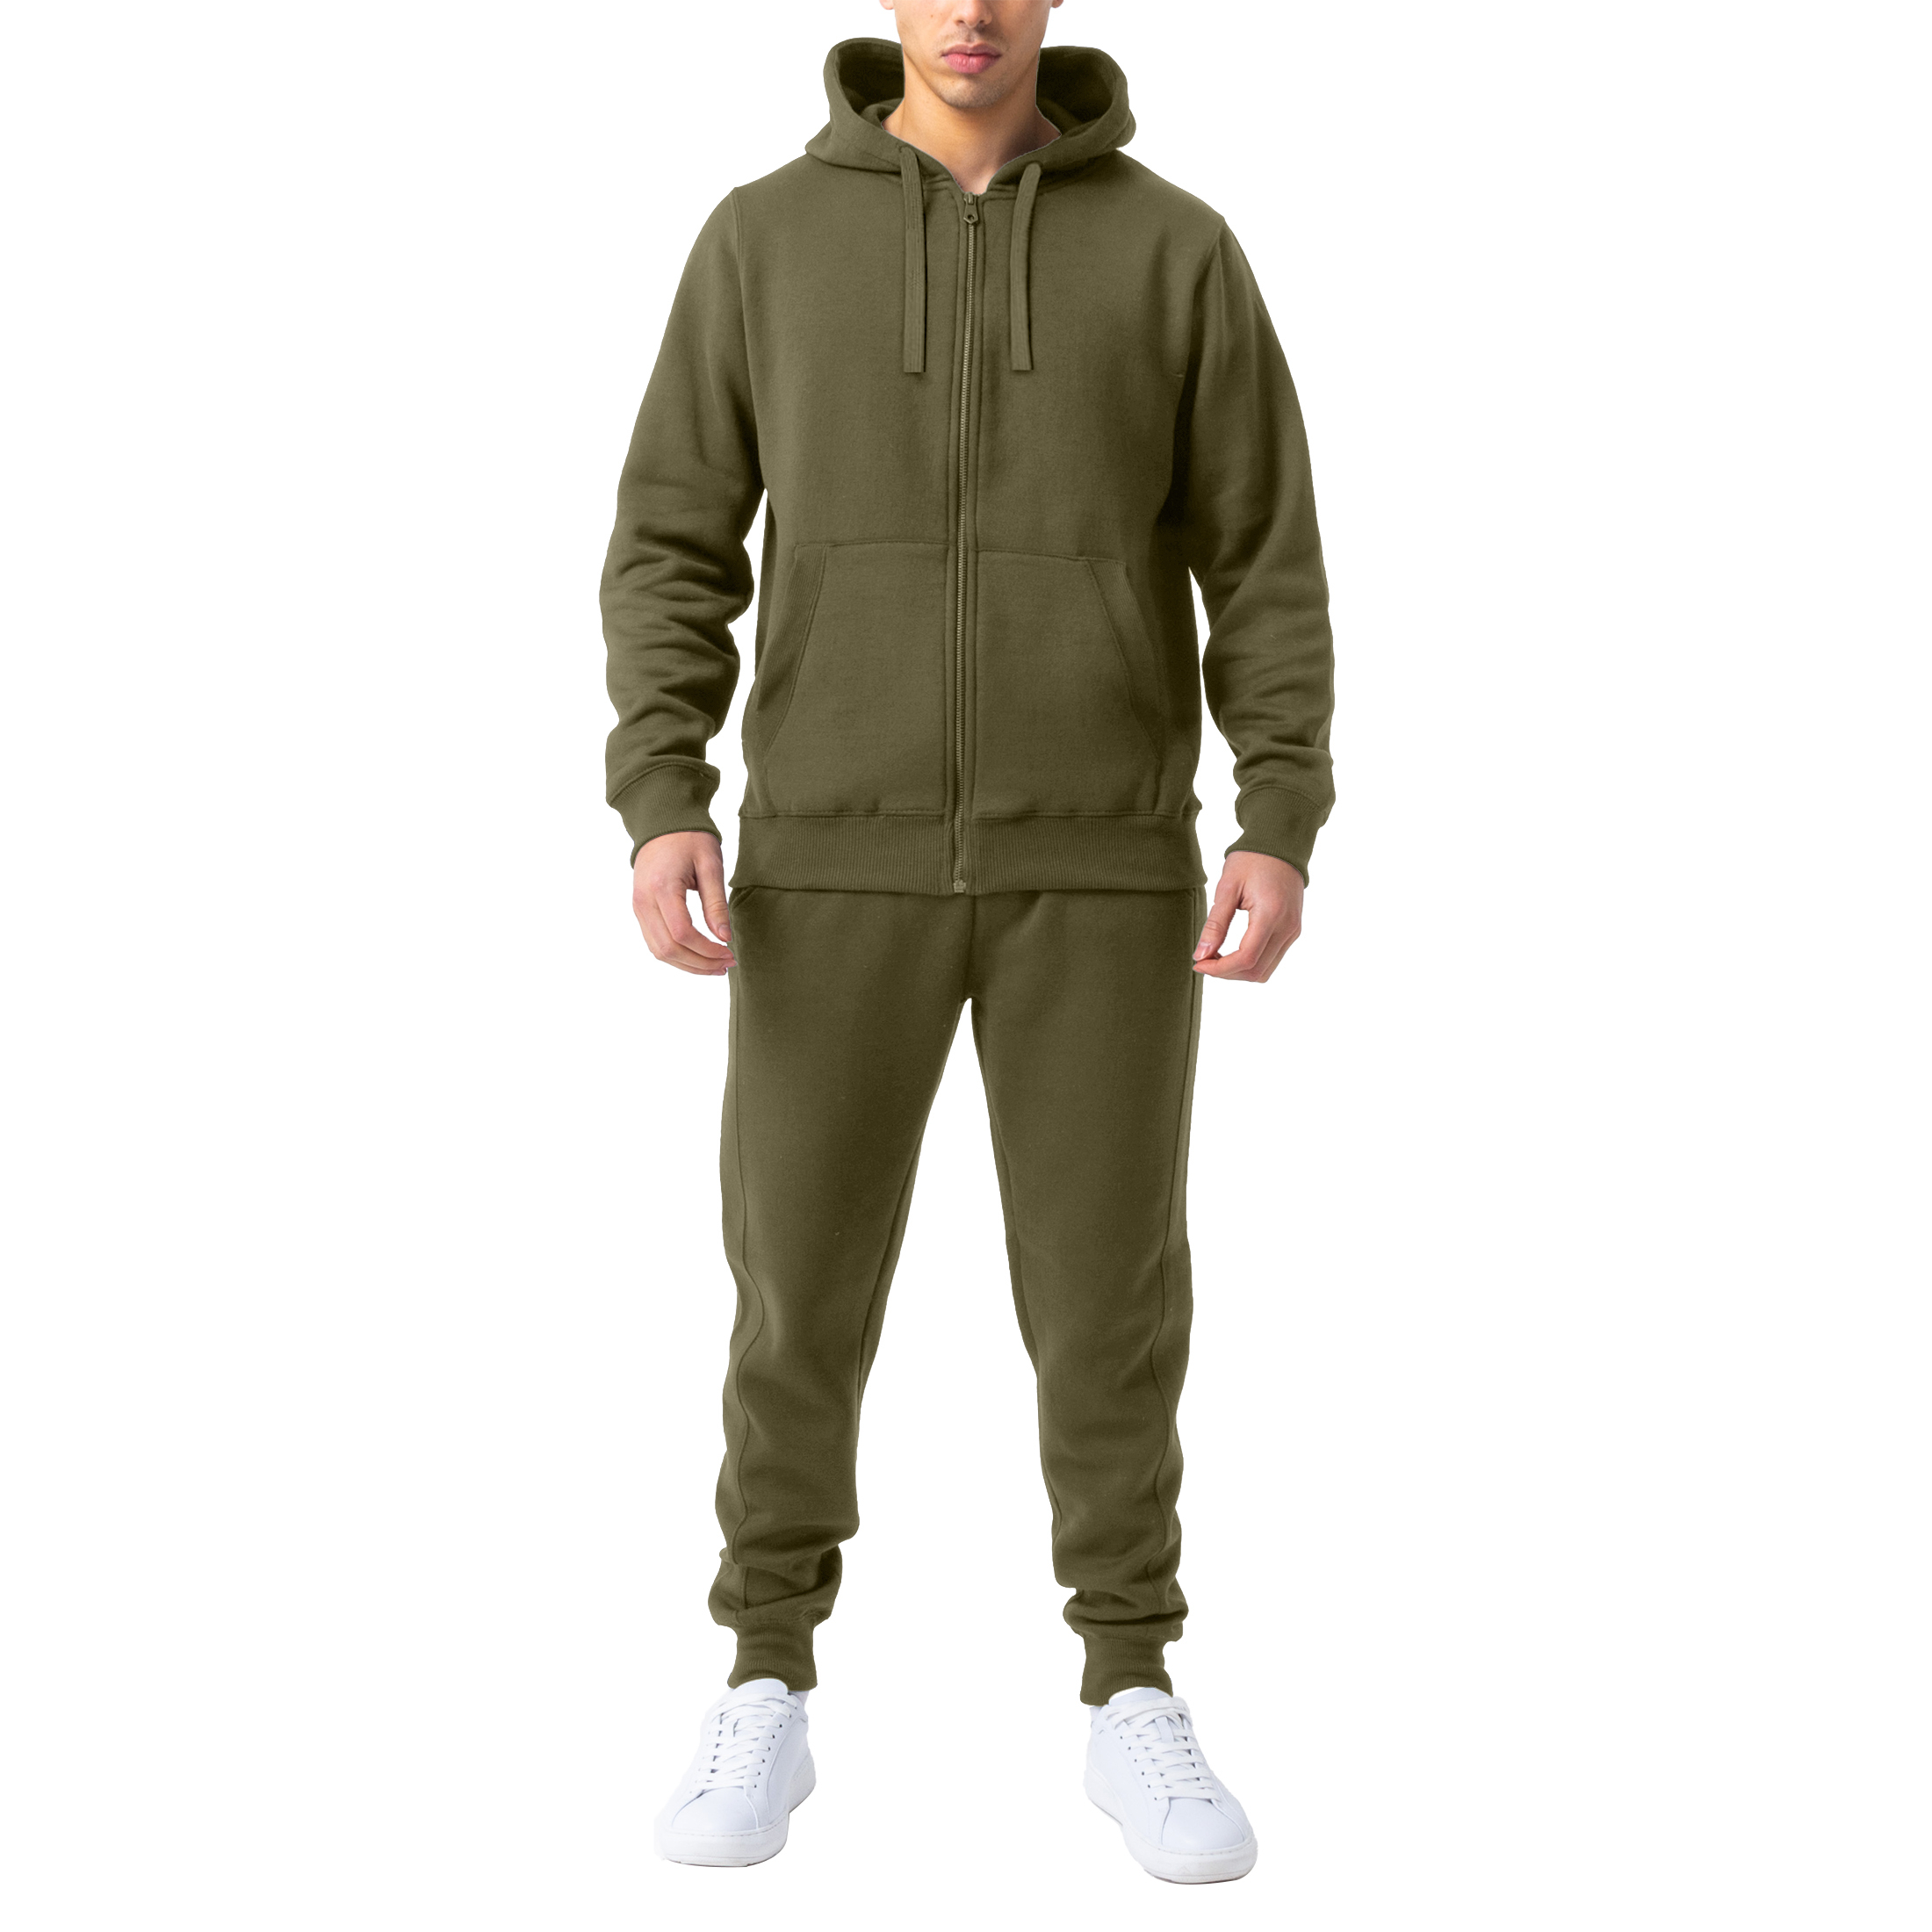 Men's Casual Jogging Athletic Active Full Zip Up Tracksuit - Olive, Small